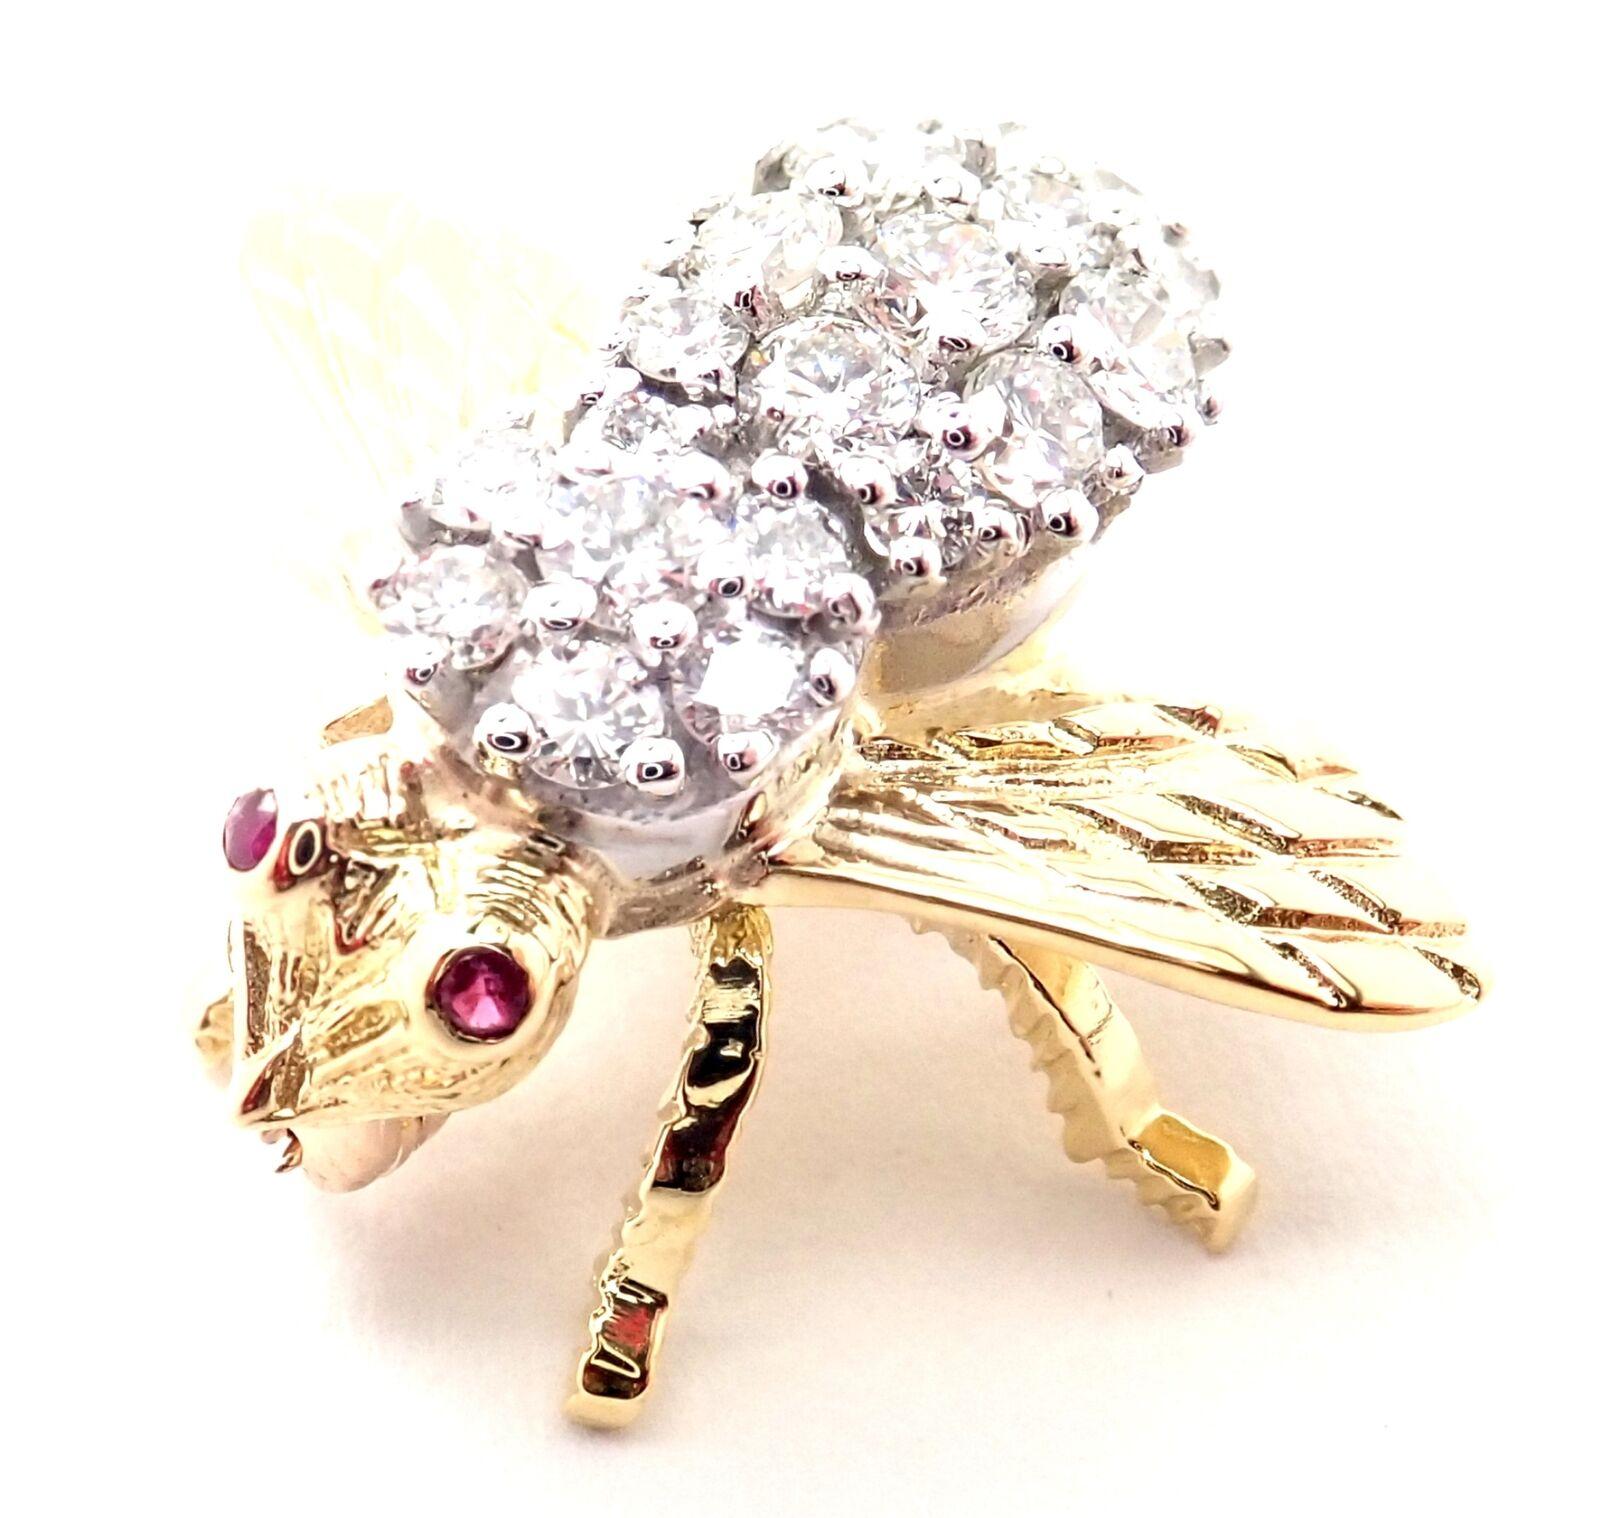 18k Yellow Gold Diamond Bee Pin Brooch by Herbert Rosenthal.
With 19 round brilliant cut diamonds VS1 Clarity, G Color total weight approximately 1ct
2x Rubys
Details:
Measurements Brooch: 22mm x 24mm
Weight: 6.2 grams
Stamped Hallmarks: HR